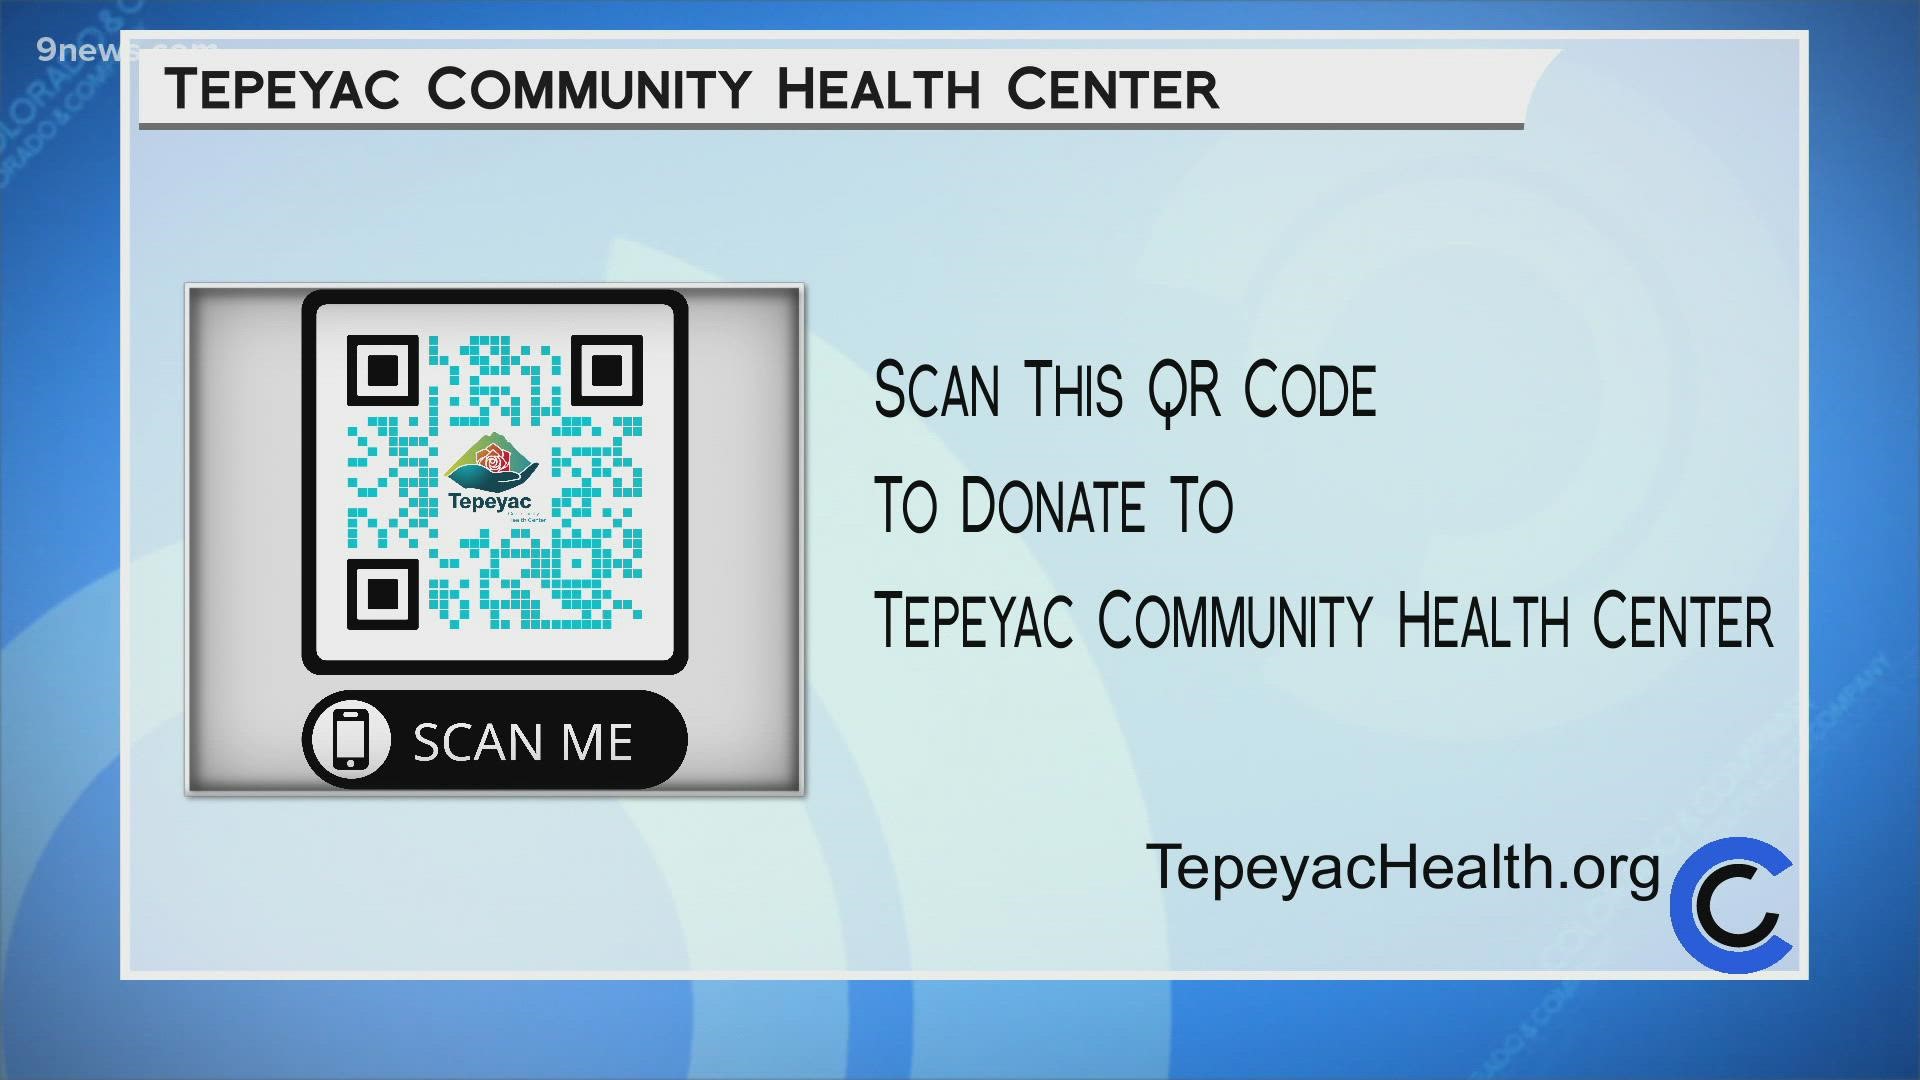 Scan the QR code in the segment or TepeyacHealth.org to donate or to learn more about the services provided at Clinica Tepeyac.